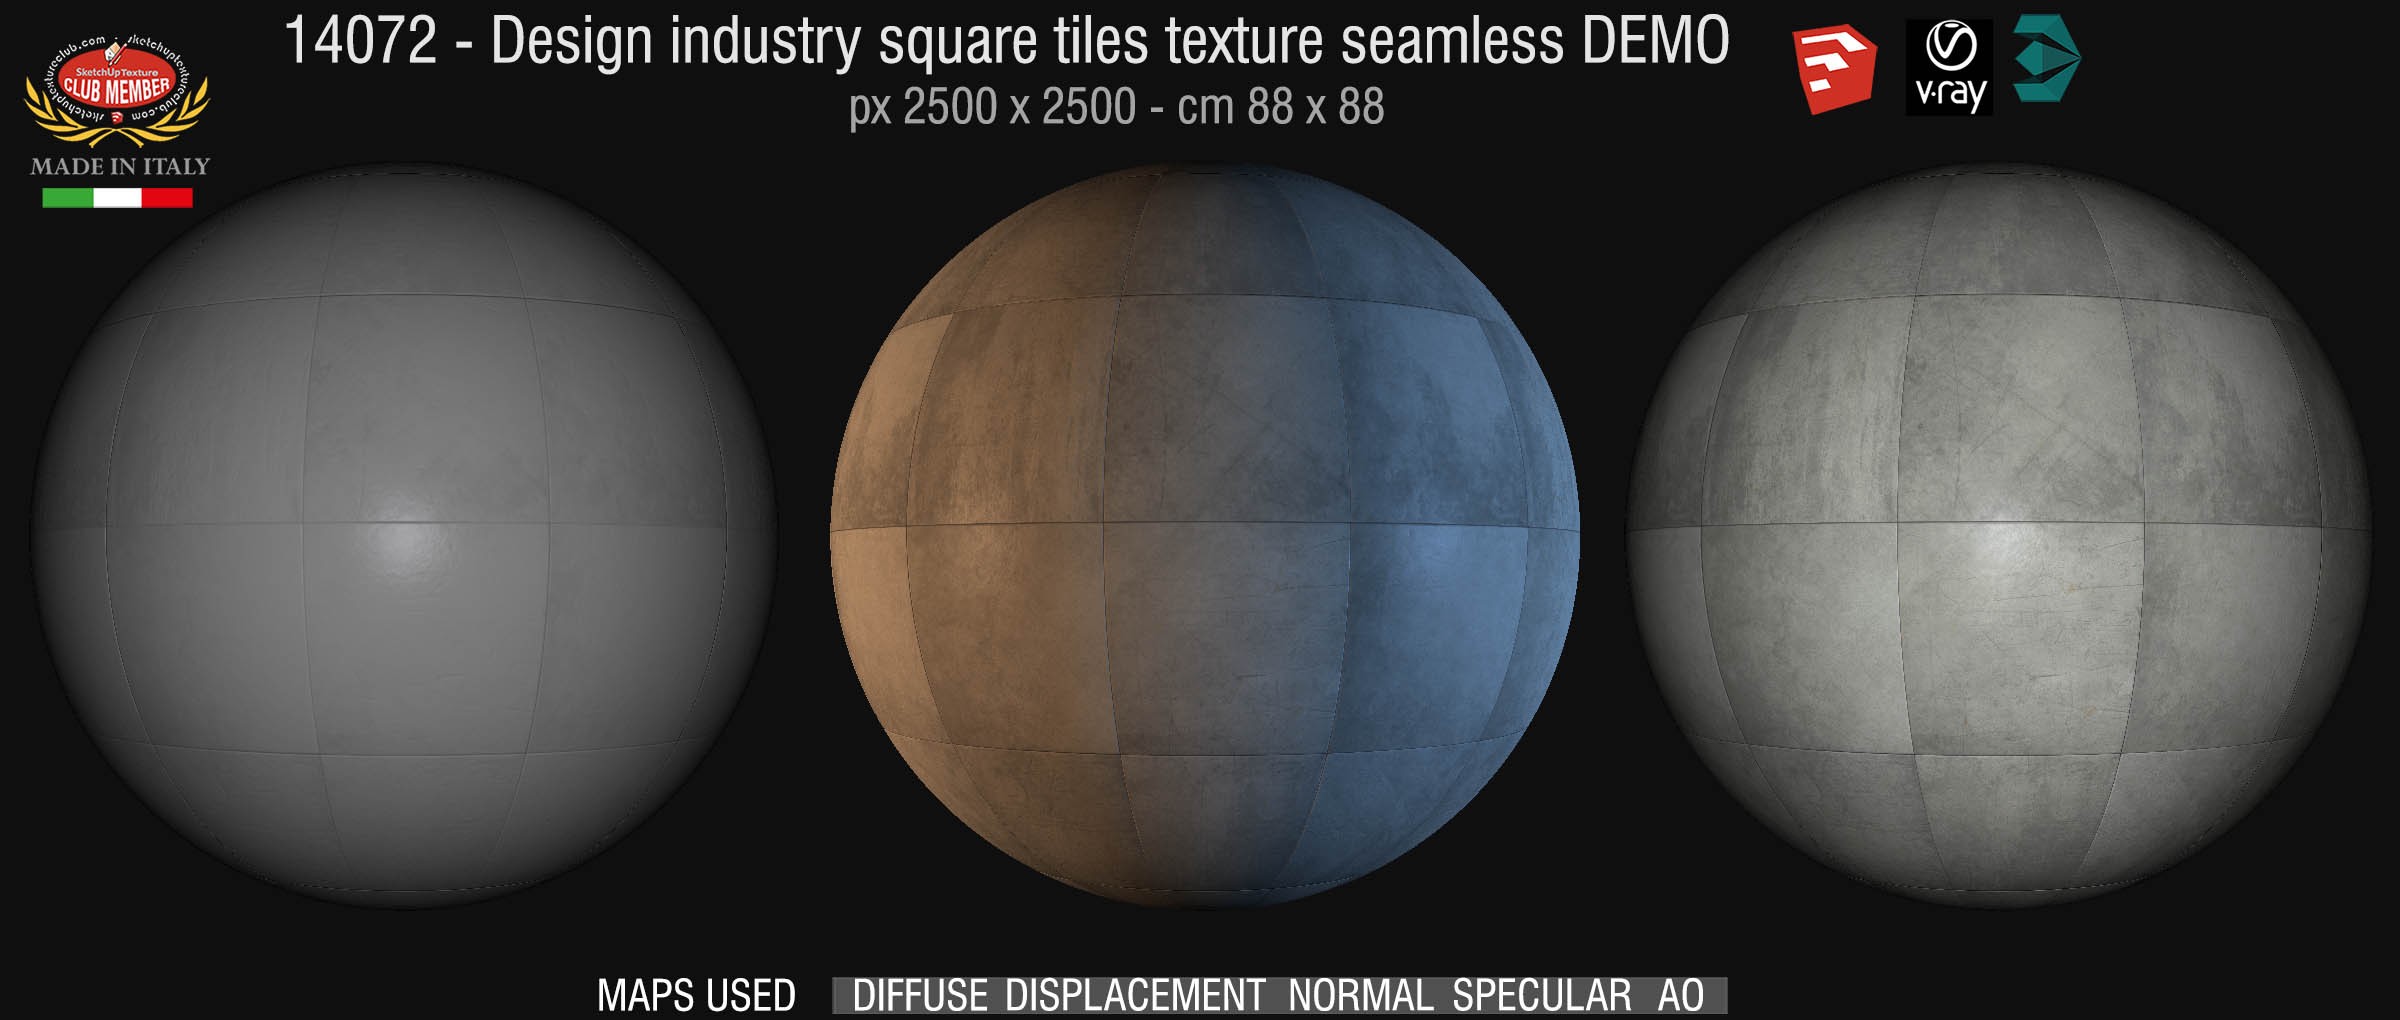 14072 Design industry square tile texture seamless + maps DEMO